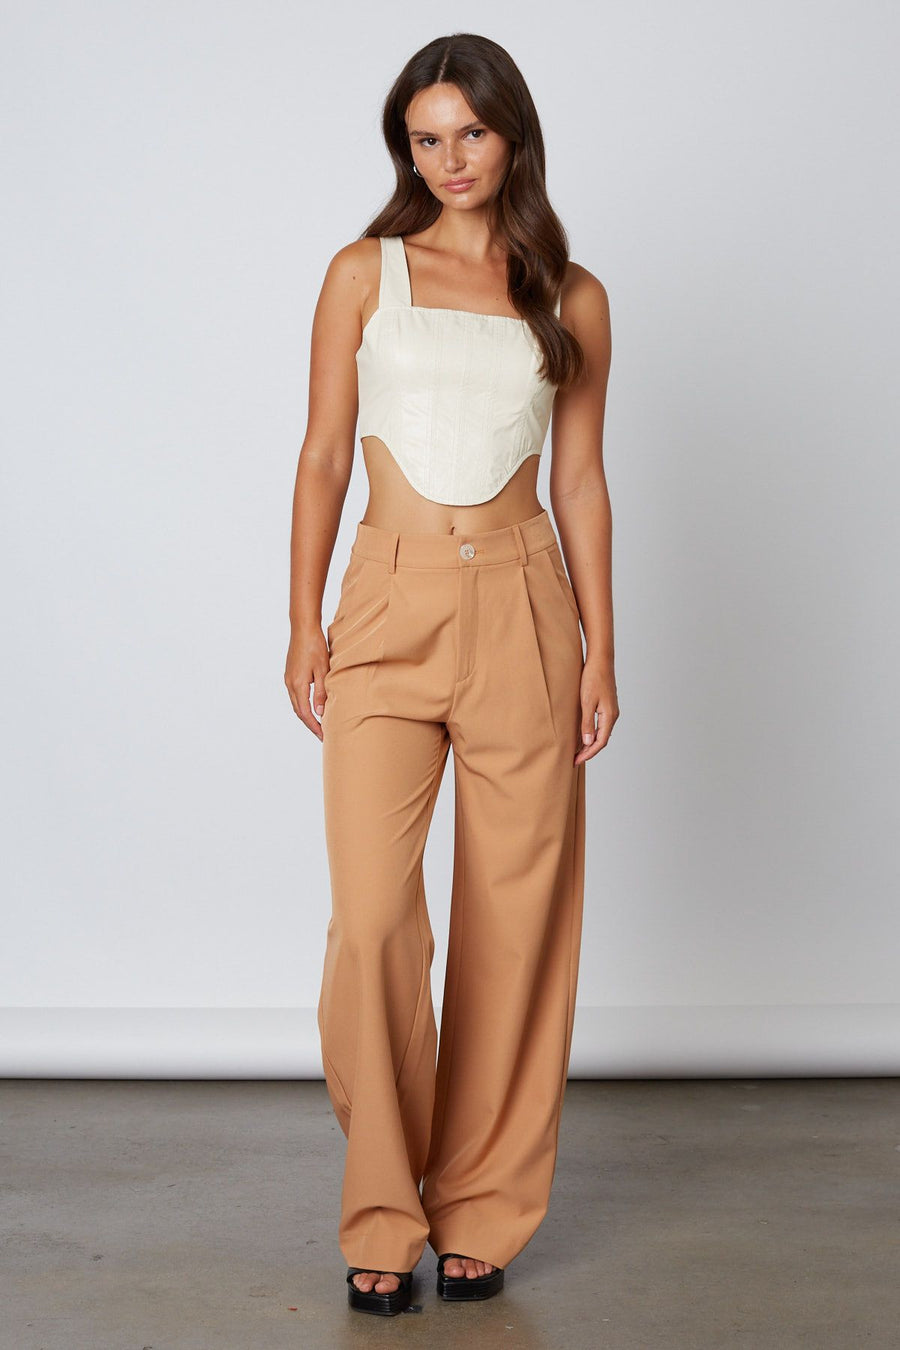 High waisted leg trouser pants in the color tan.